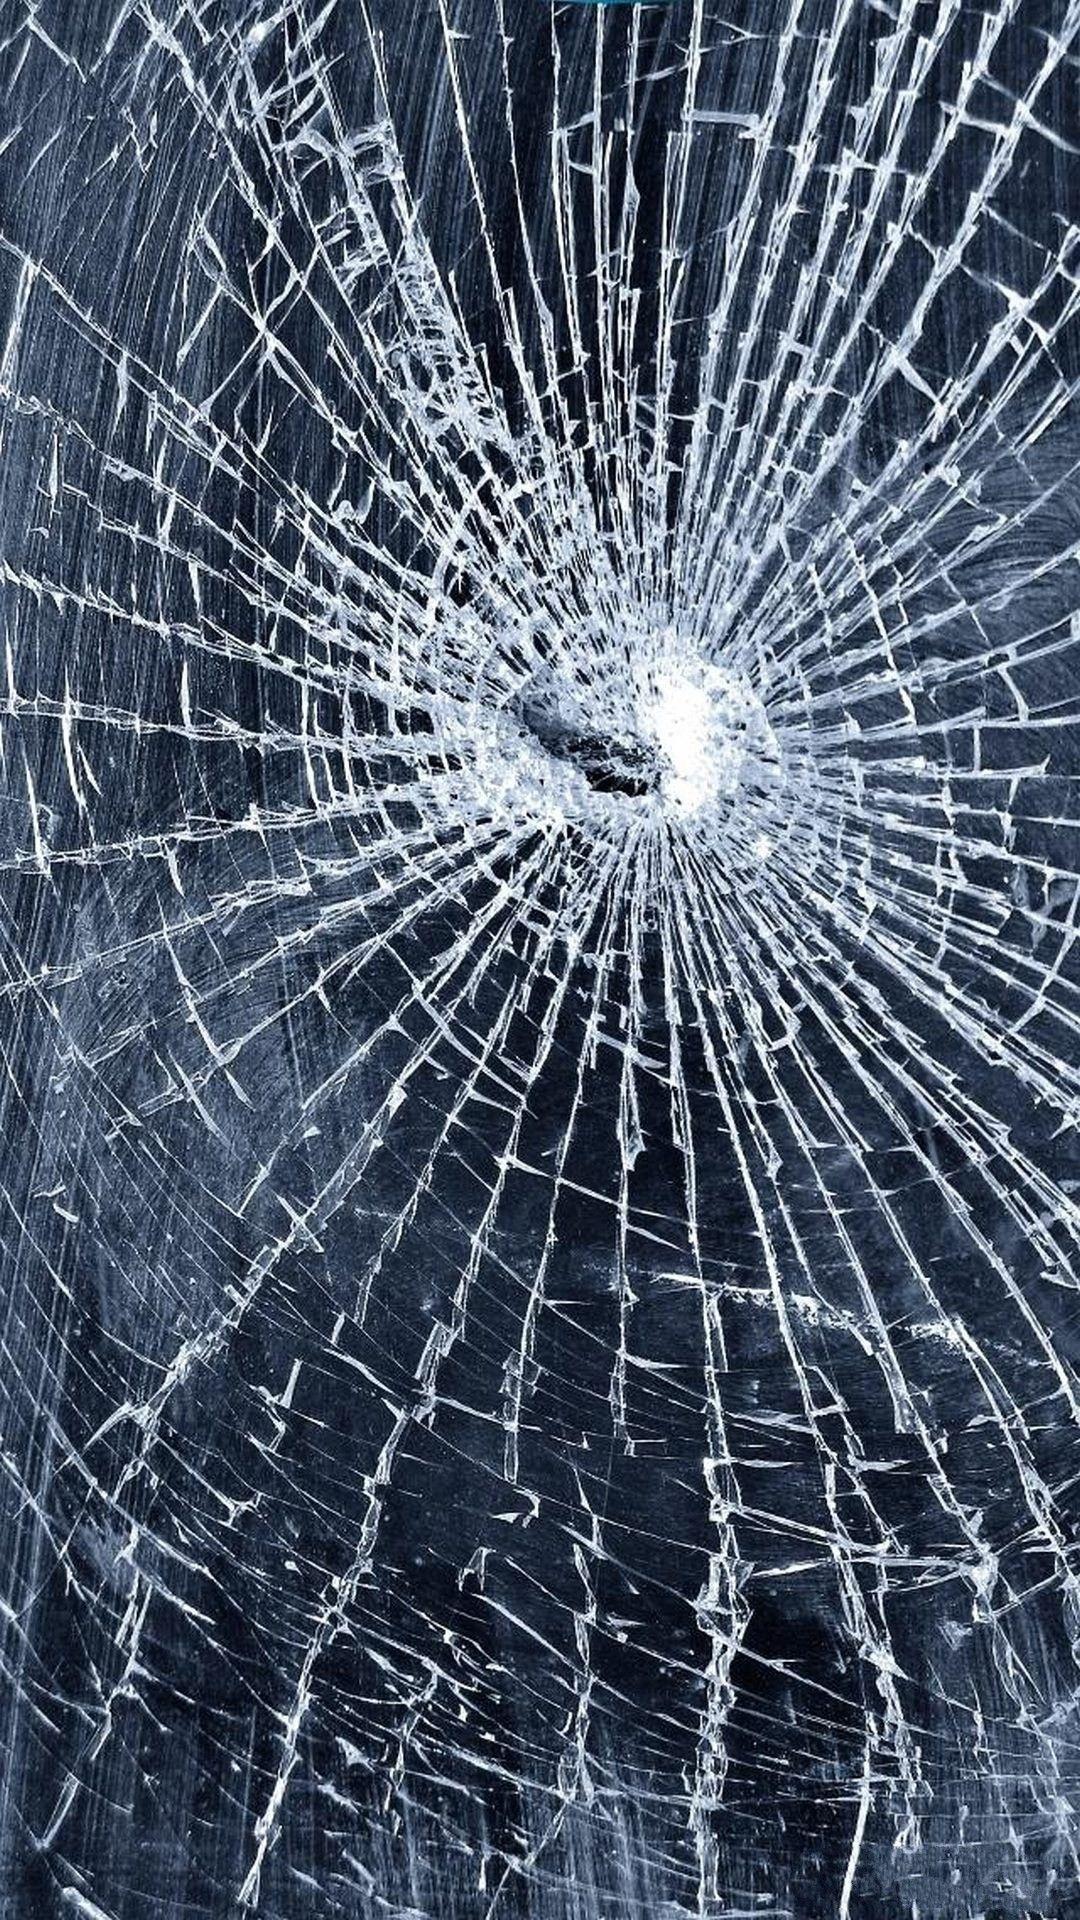 Top Cracked Screen Wallpaper Android FULL HD 1080p For PC Background. Broken screen wallpaper, Screen wallpaper, Broken screen